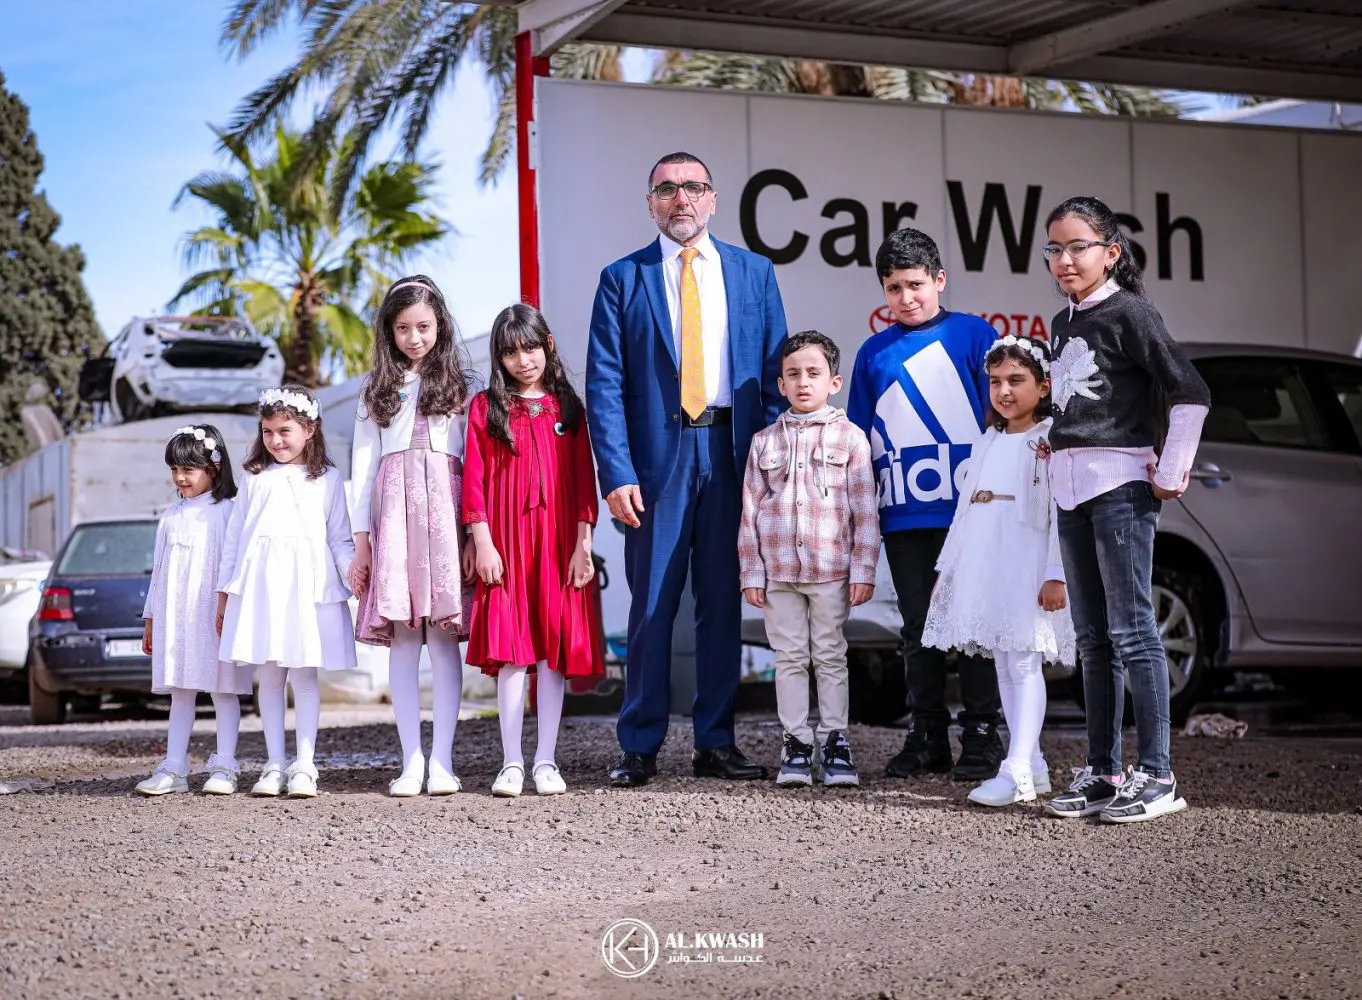 The final event of the Dream car art contest competition in Libya